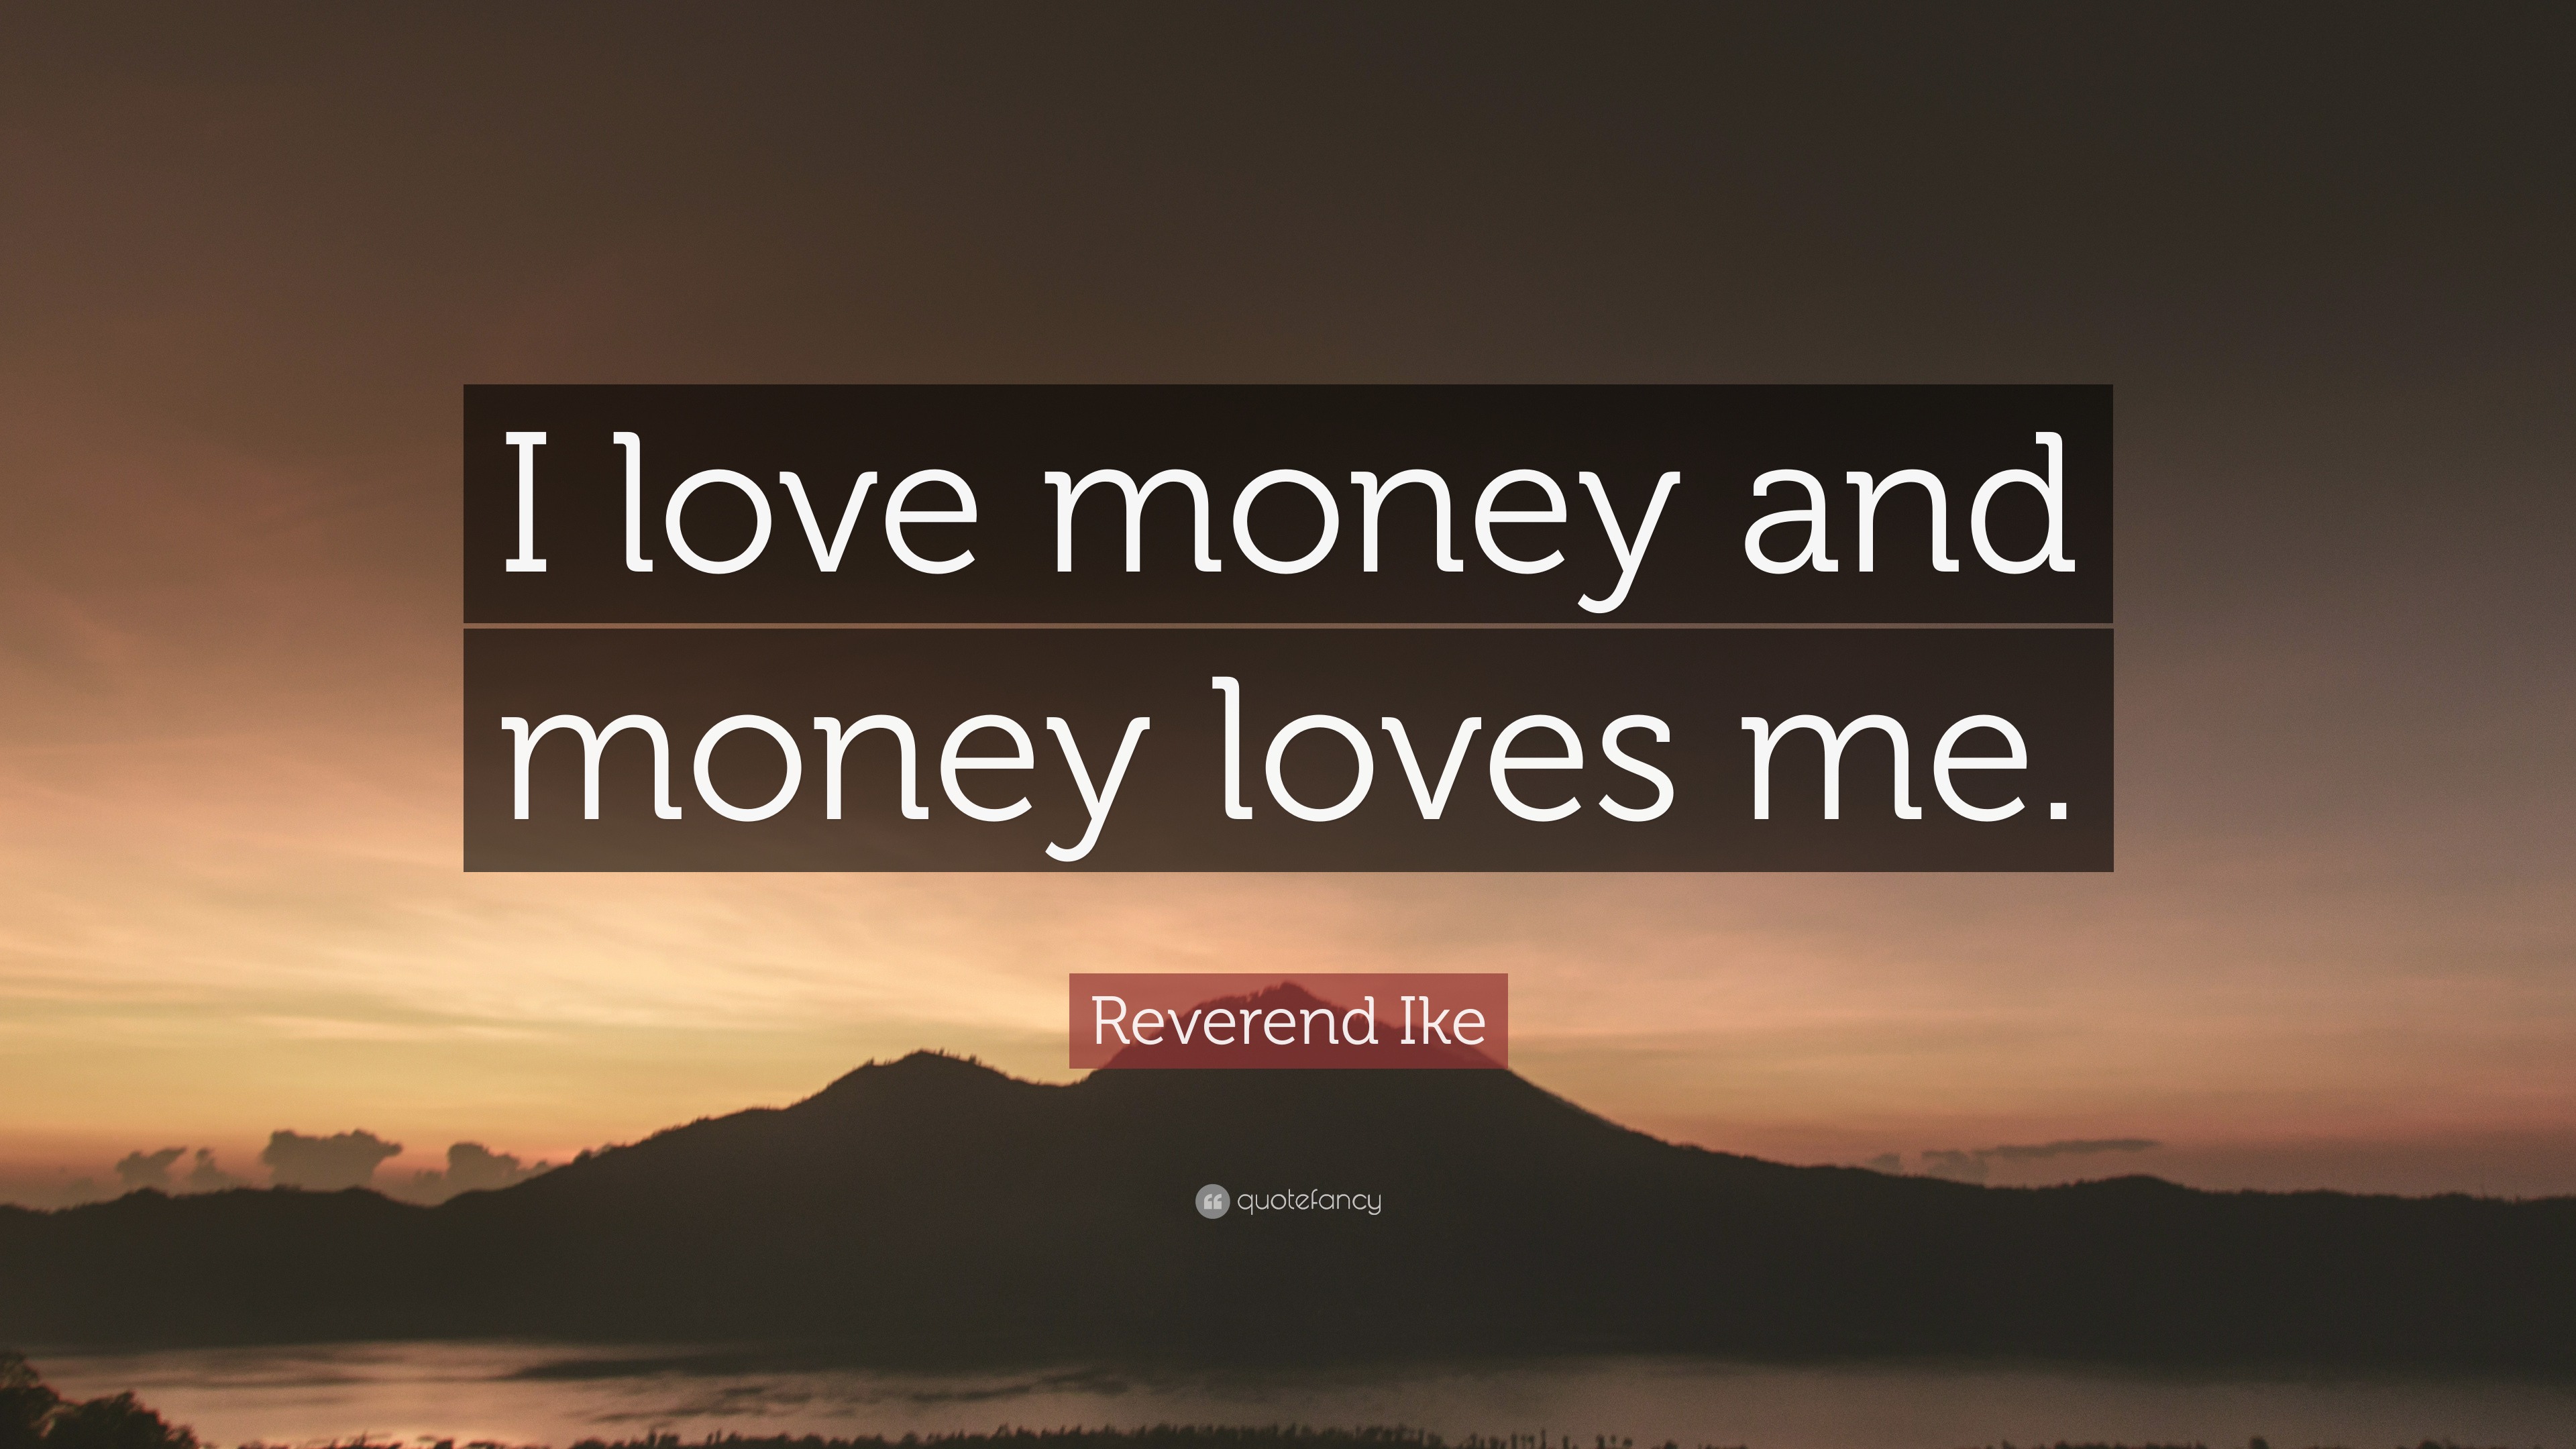 Reverend Ike Quote “I love money and money loves me.”